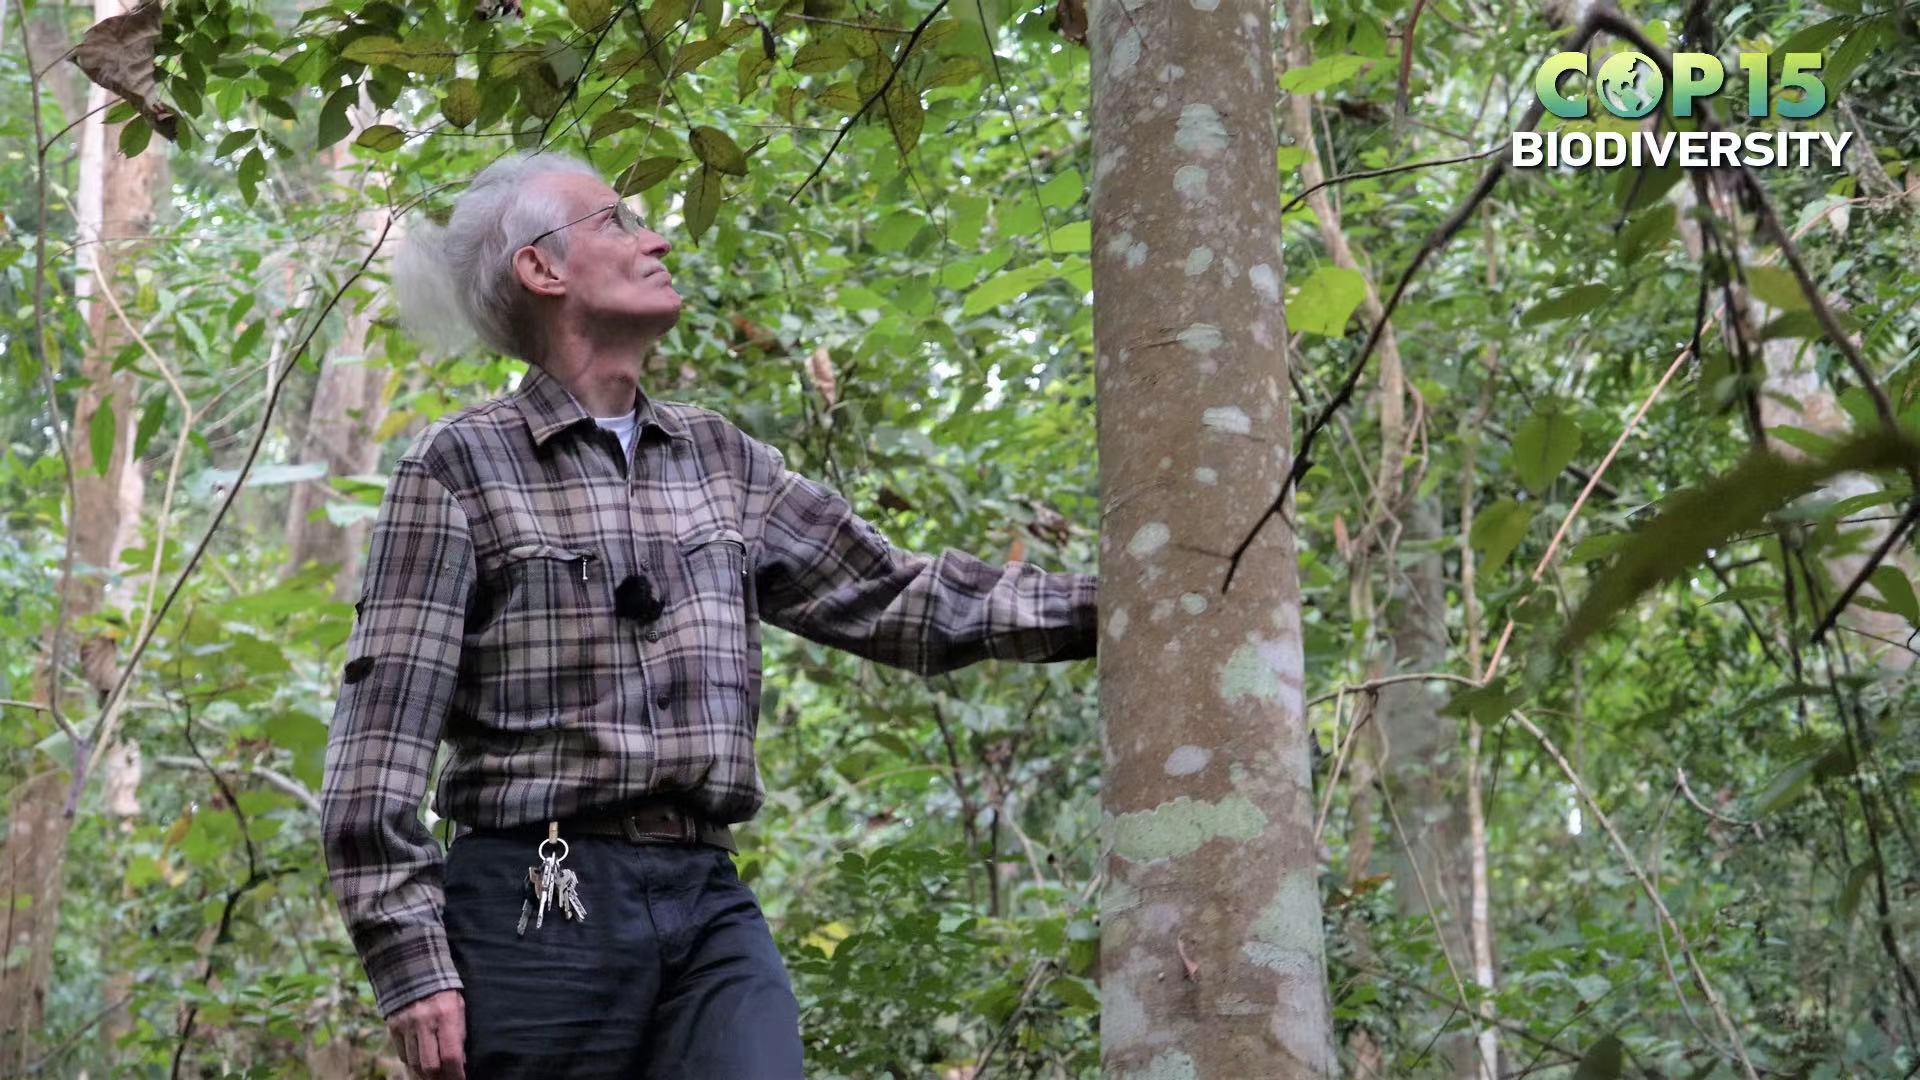 Live: Visiting the rainforest recreated by former Swiss diplomat in SW China